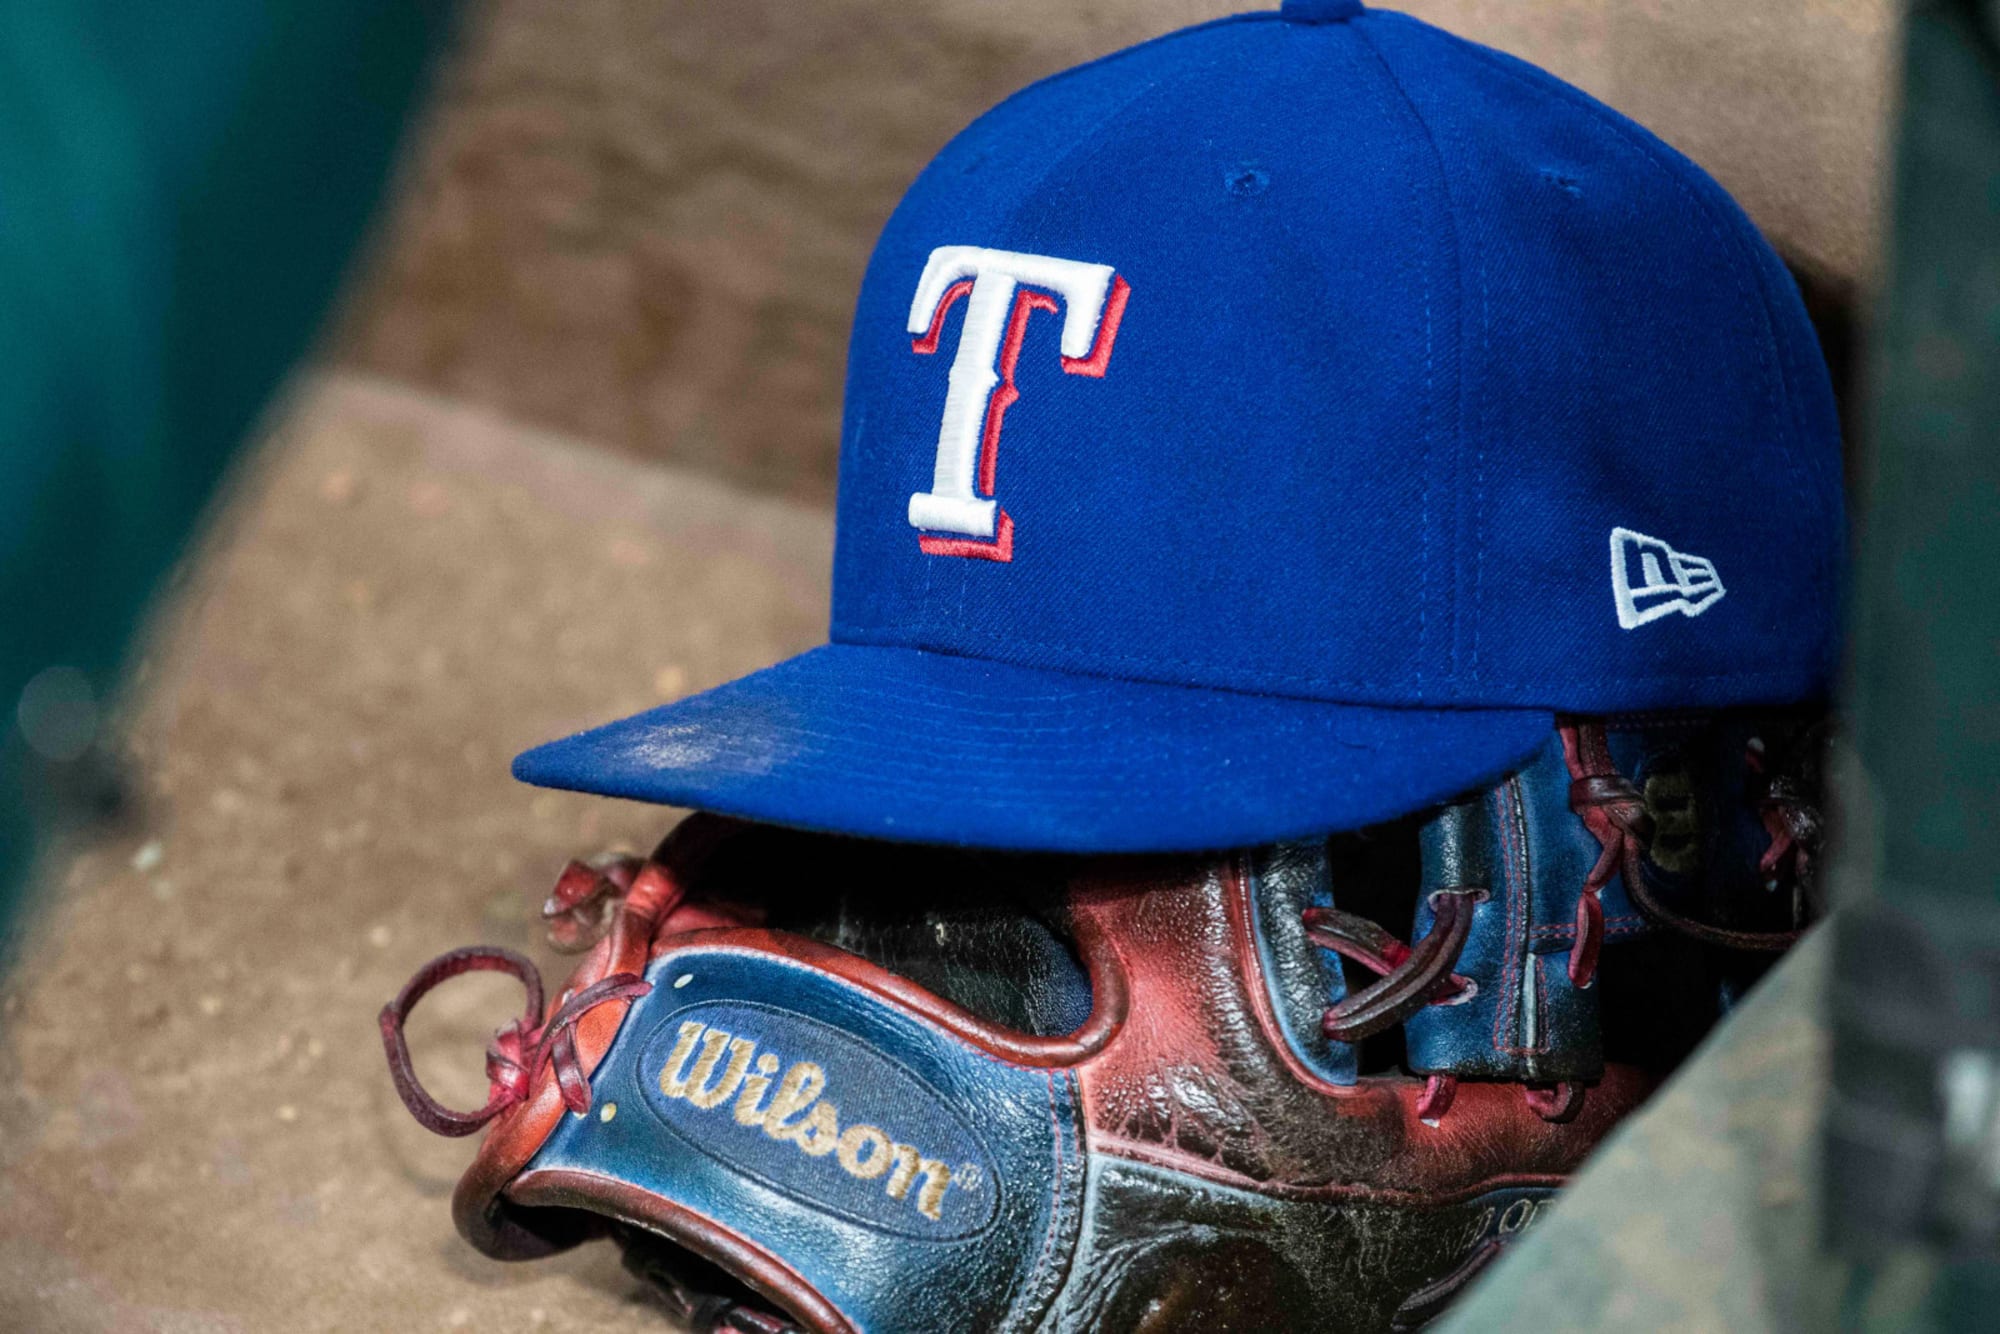 2023 Texas Rangers deGrom Replica Jersey Giveaway - Nouvette